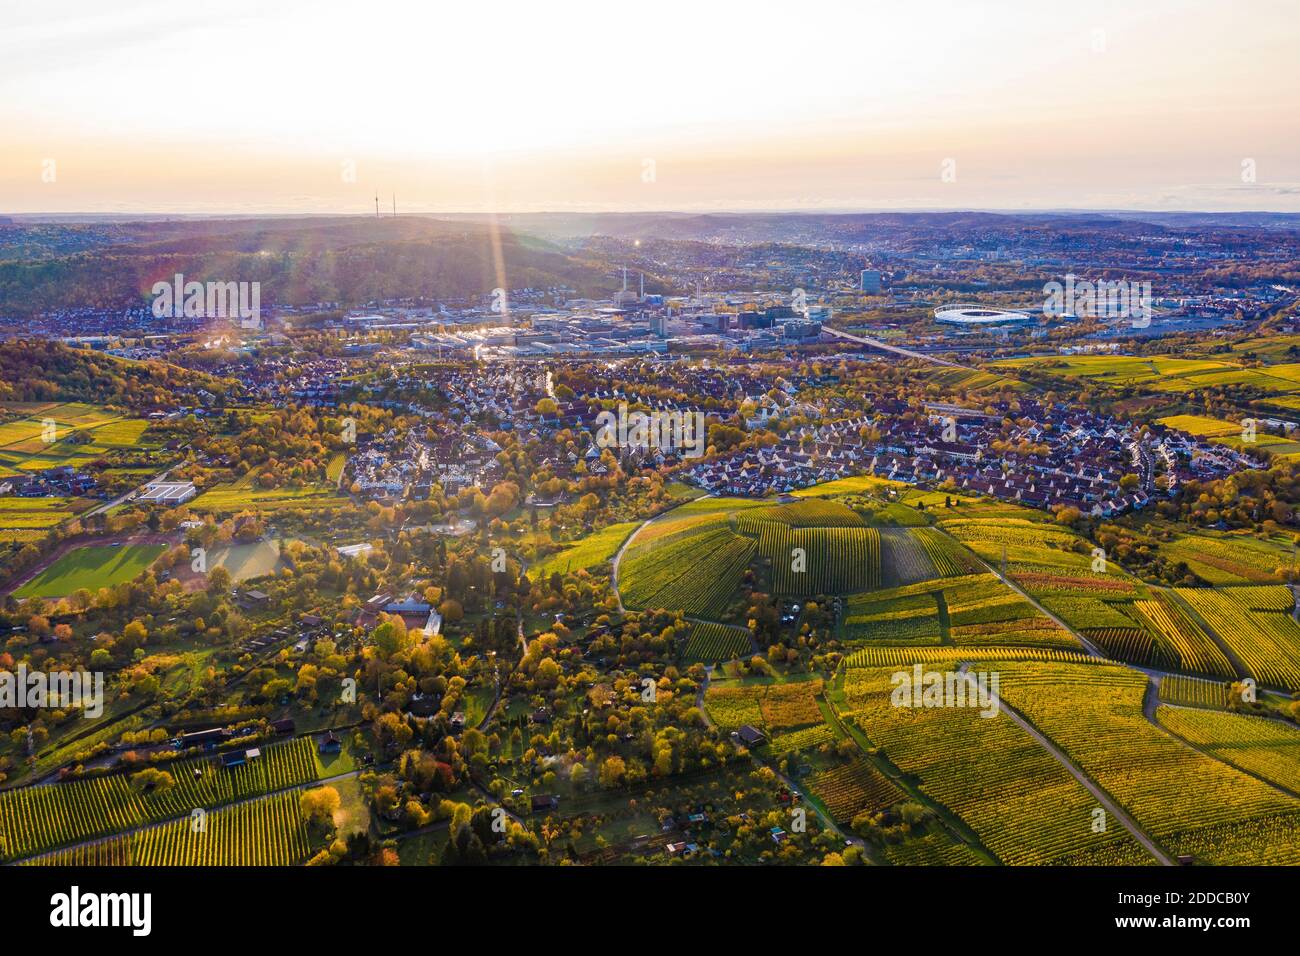 Germany, Baden-Wurttemberg, Stuttgart, Aerial view of vast vineyards in front of countryside town at autumn sunset Stock Photo